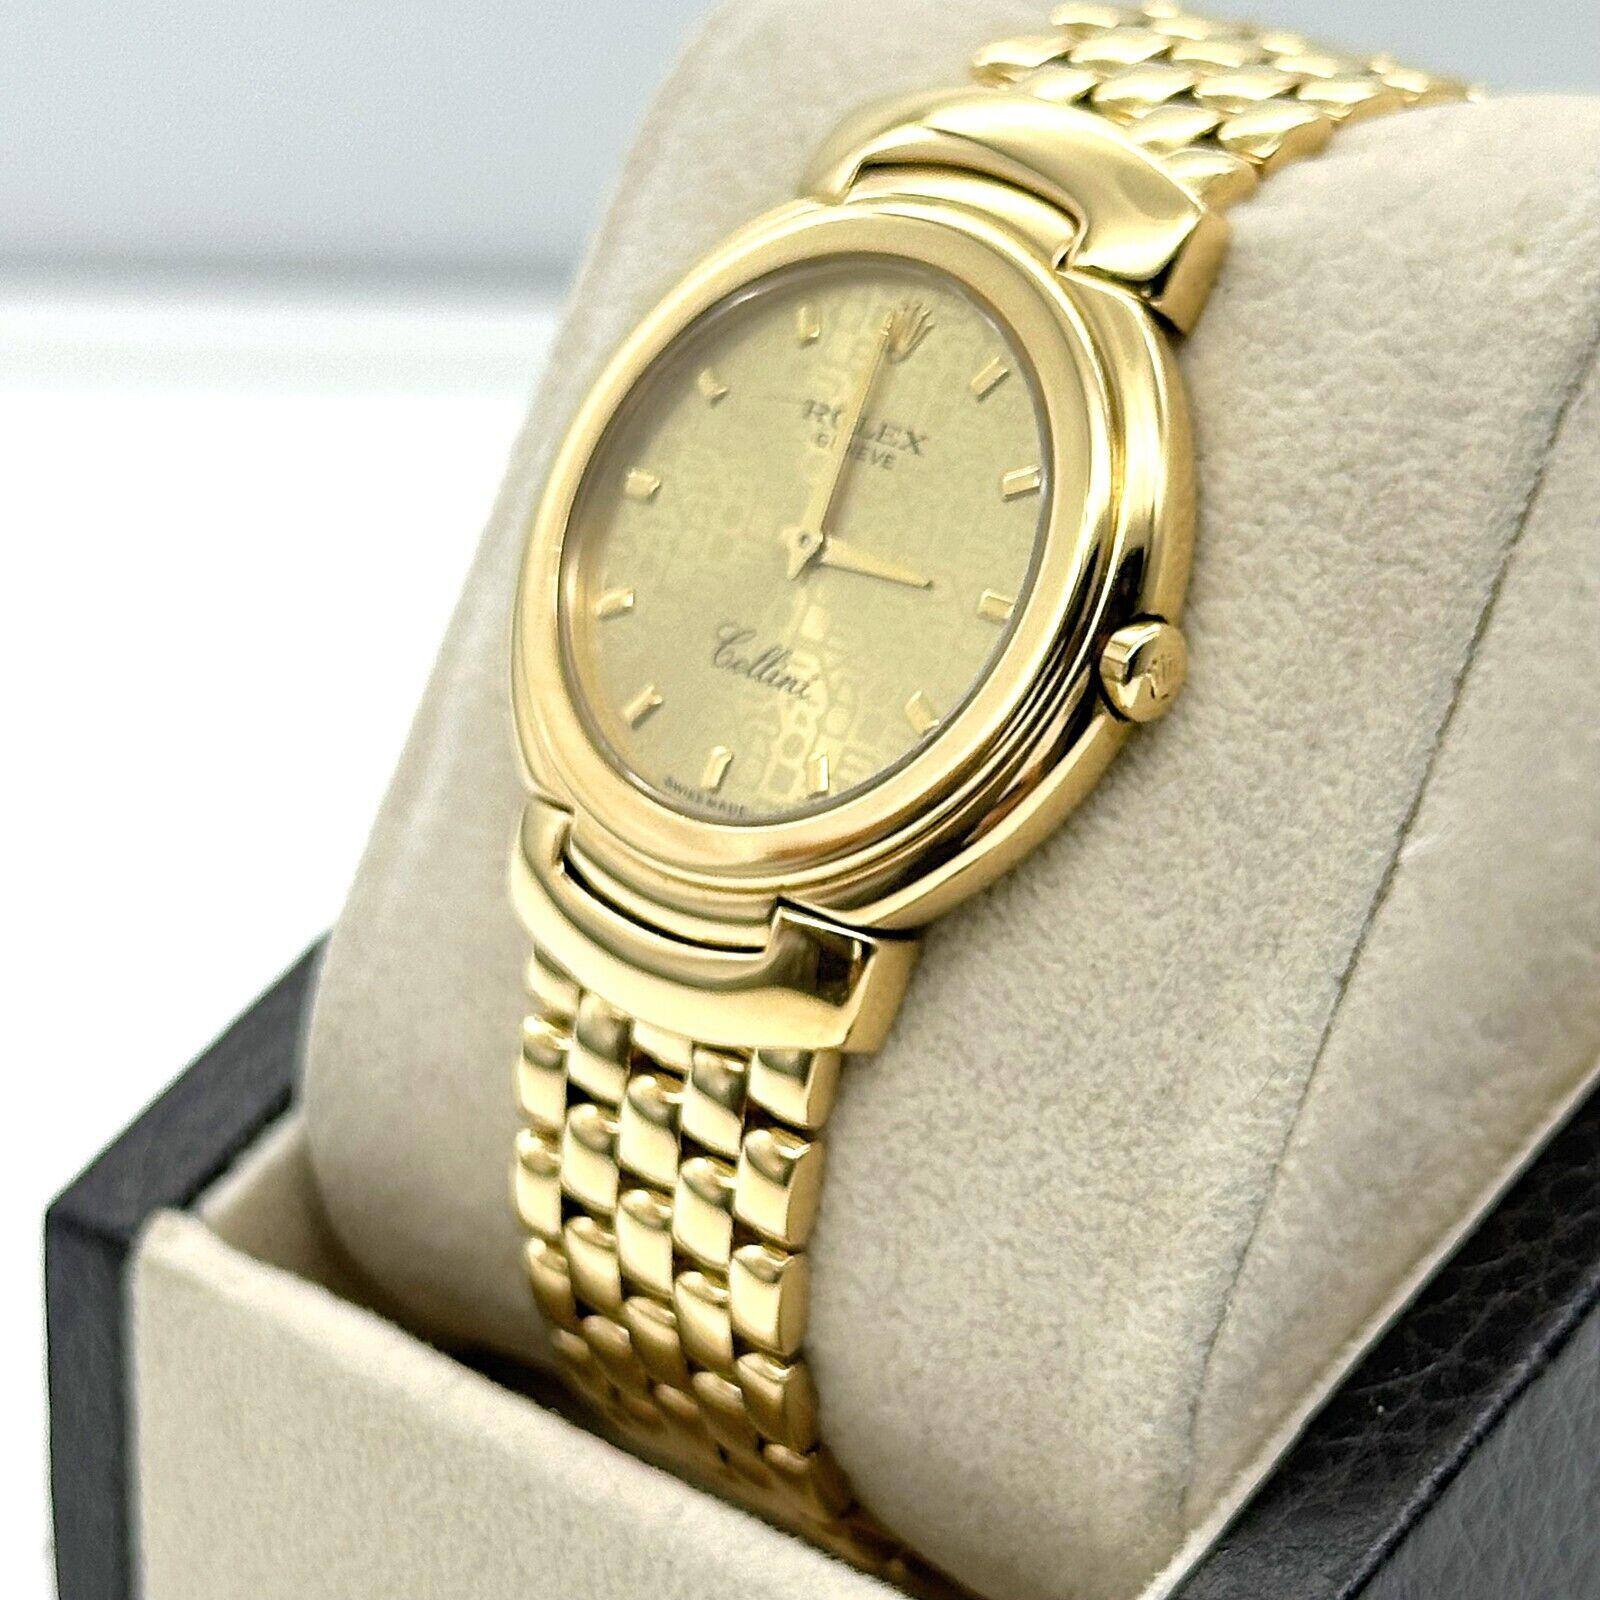 Style Number: 6622

Serial: S108***

Year: 1993

Model: Cellini

Case Material: 18K Yellow Gold

Band: 18K Yellow Gold

Bezel: 18K Yellow Gold

Dial: Champagne Jubilee

Face: Sapphire Crystal

Case Size: 33mm

Includes: 

-Elegant Watch